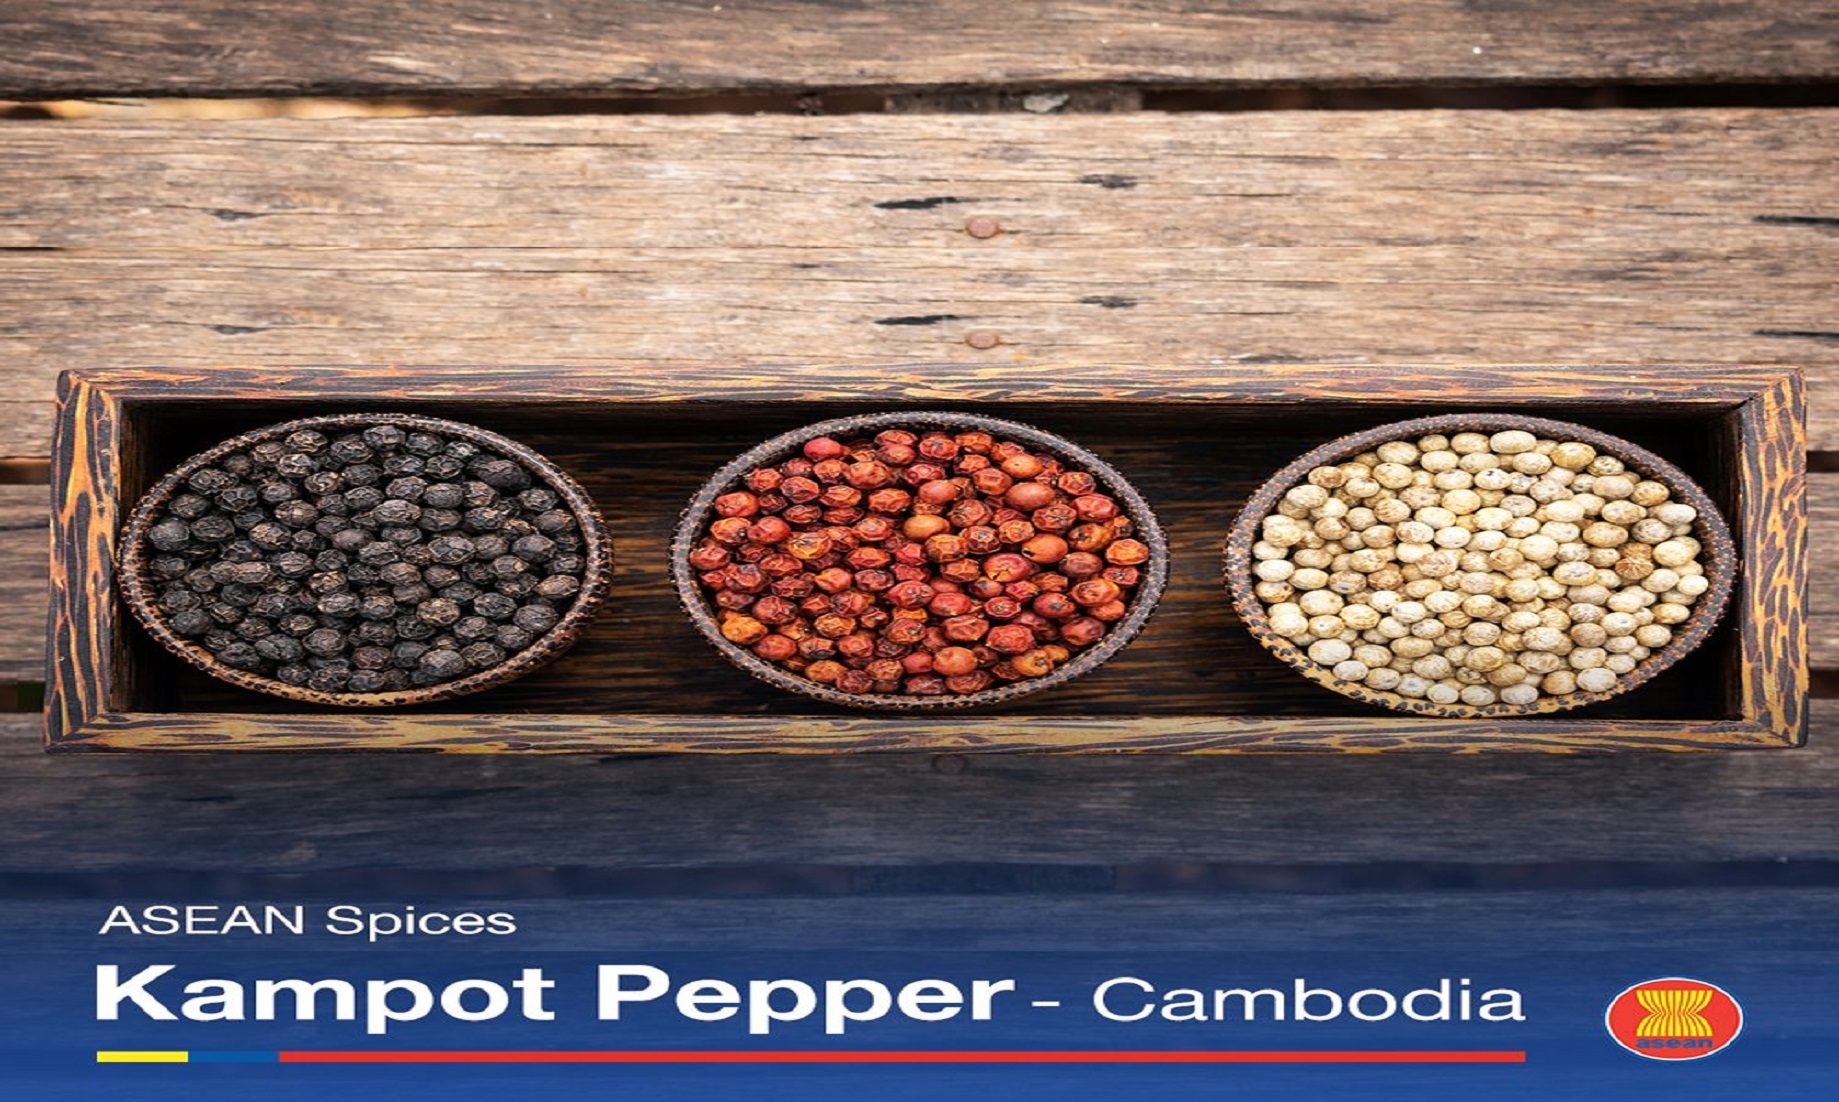 Cambodia’s Exports Of Famed Kampot Pepper Up 63 Percent Last Year